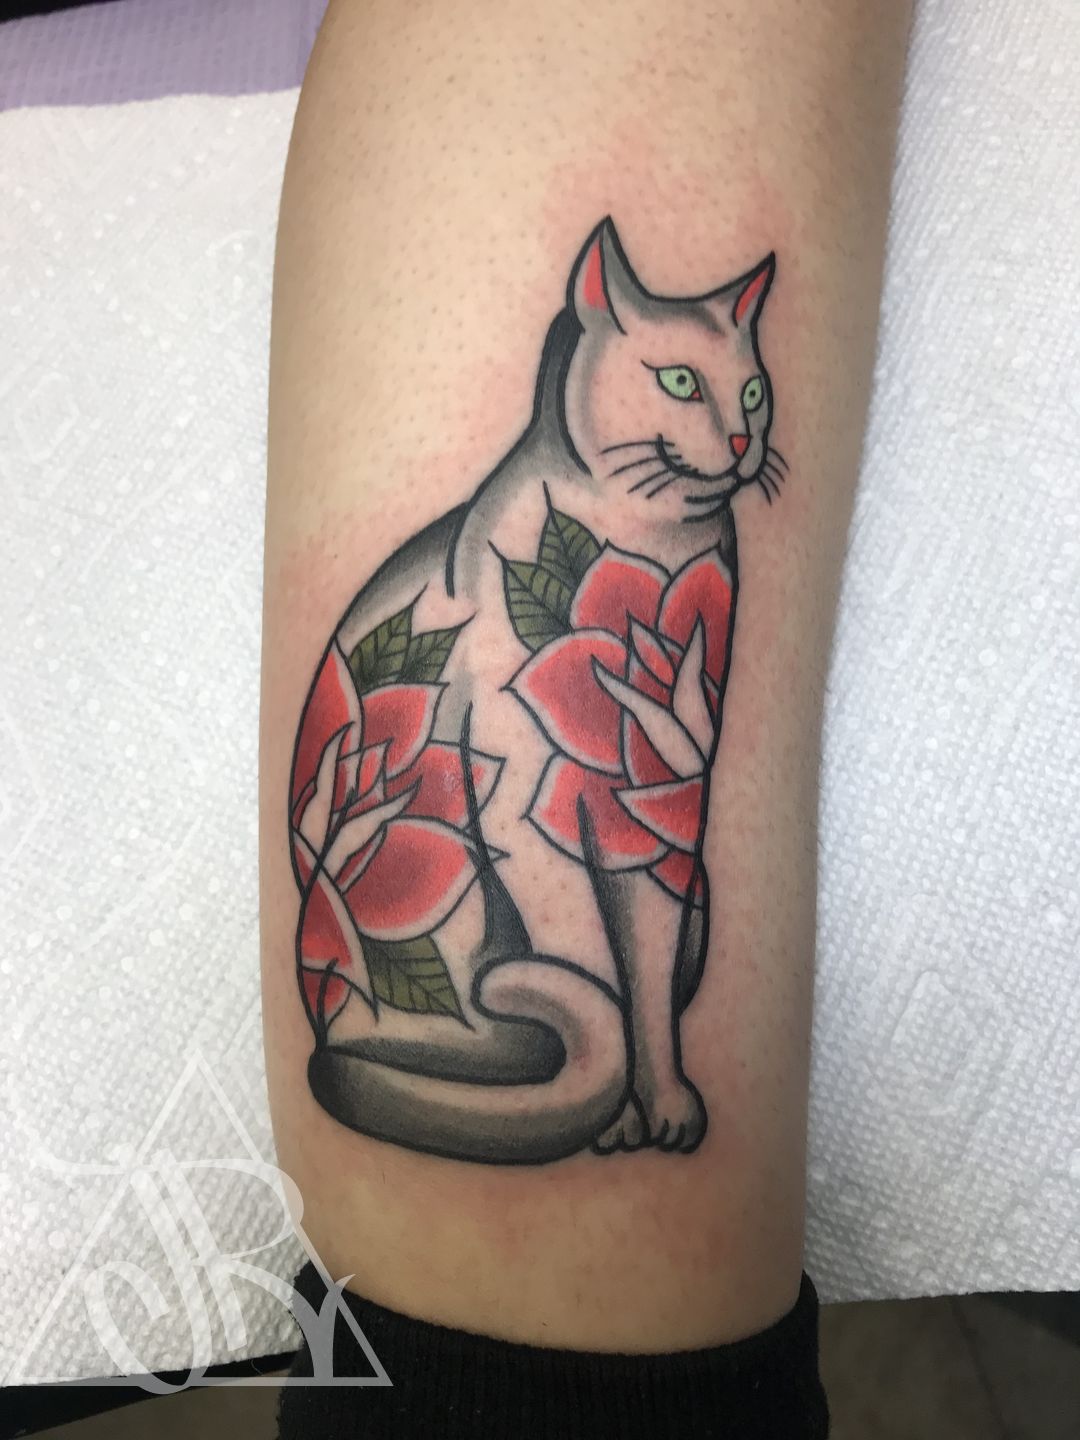 Tattoo Connect on Twitter Cute cat tattoo with flower on arm sleeve by  Ink Baby Tattoos from Brisbane httpstcoTZXkNiTcyQ  Twitter